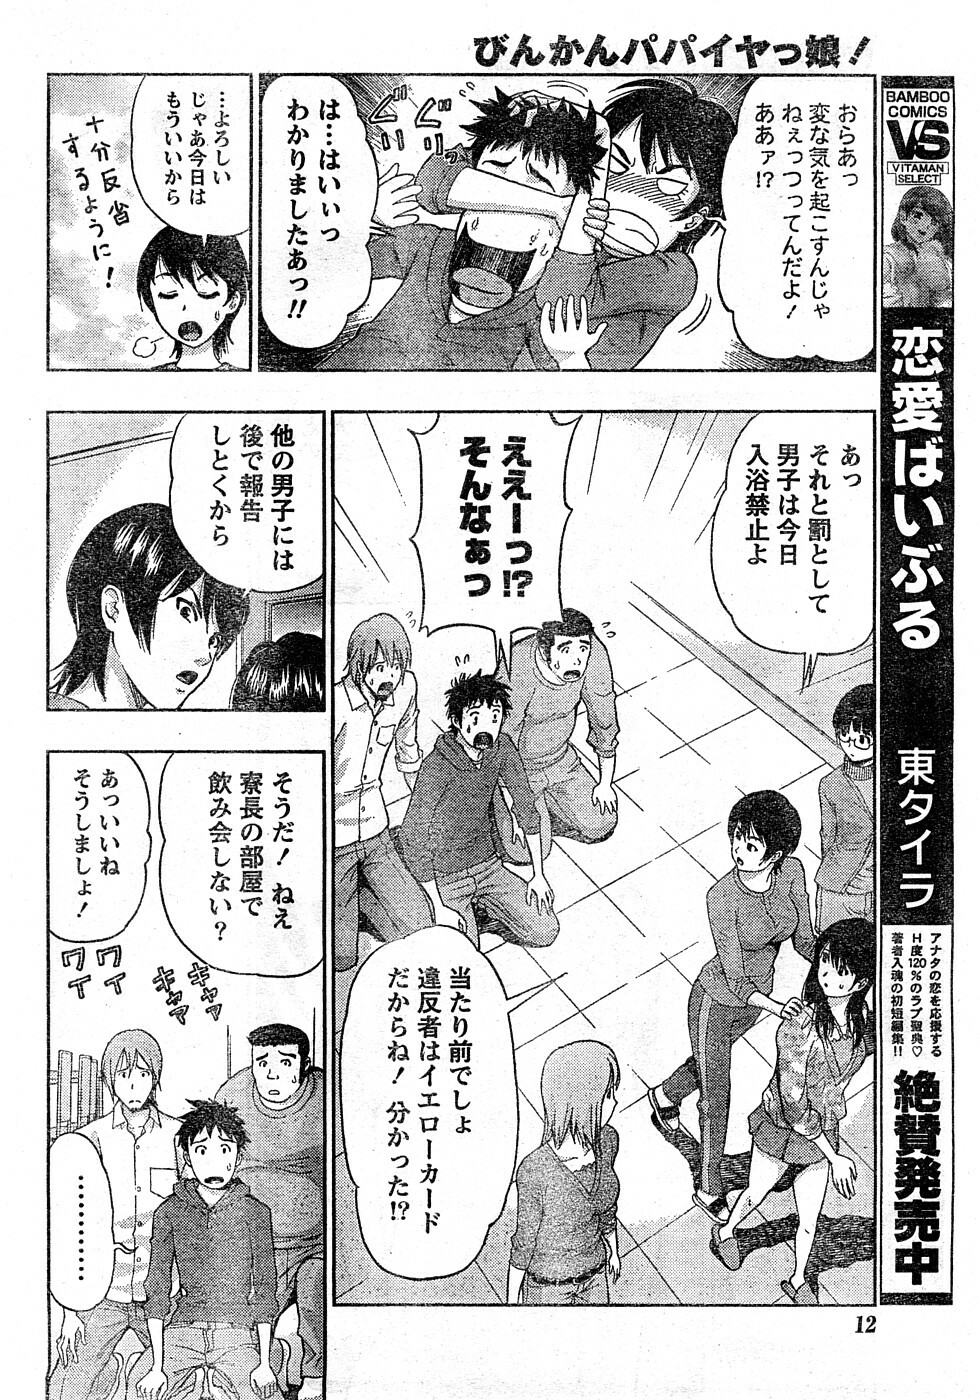 Monthly Vitaman 2009-02 [Incomplete] page 11 full